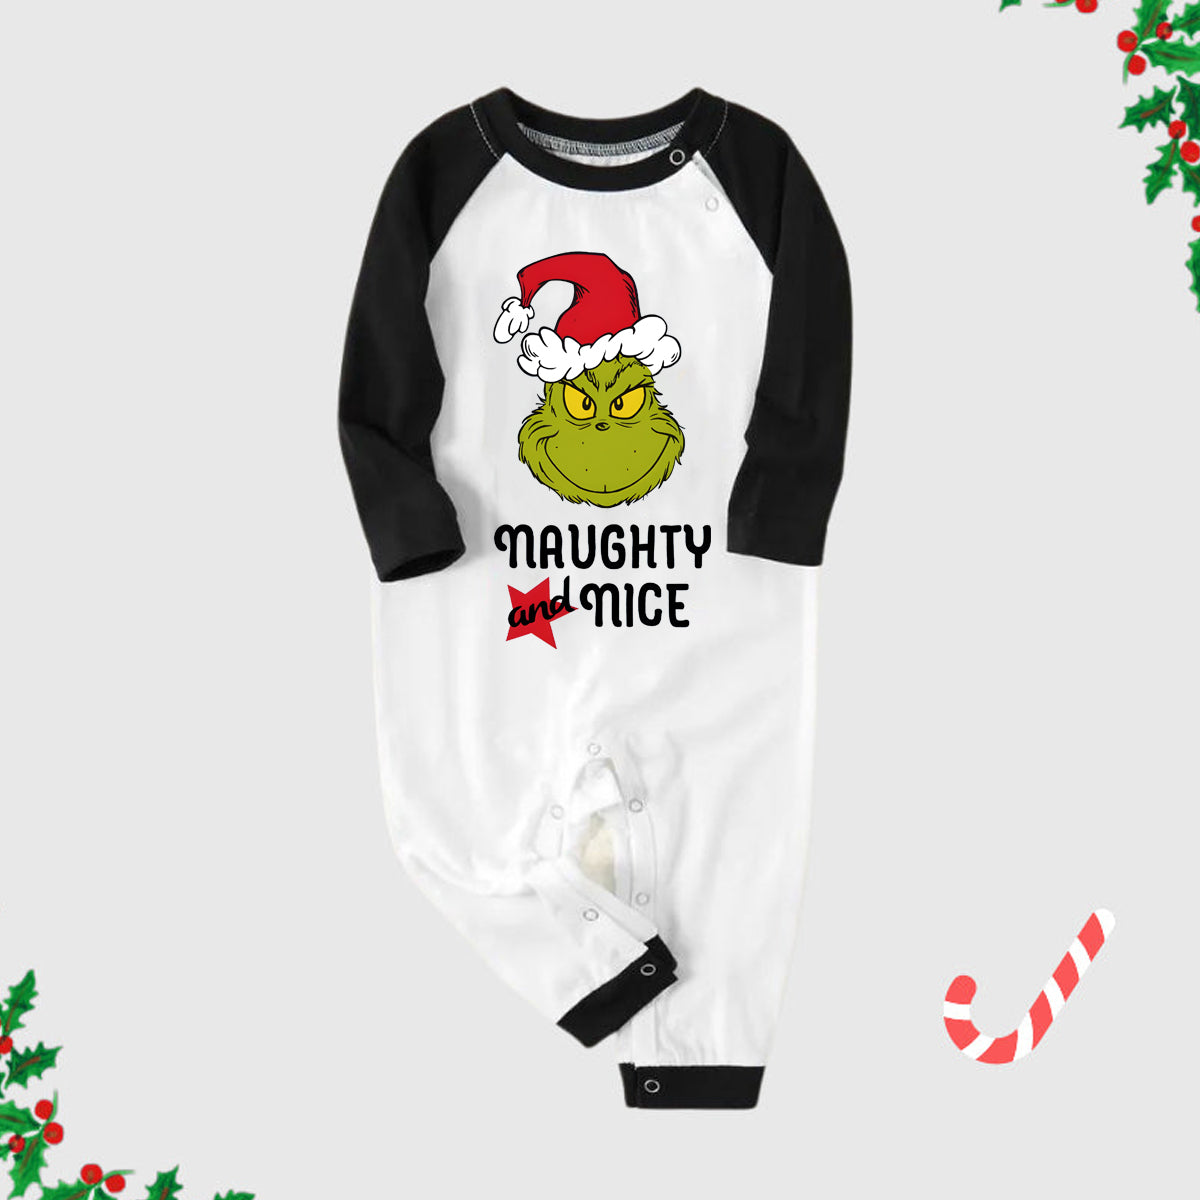 Christmas "Naughty&Nice" Letter Print Patterned Casual Long Sleeve Sweatshirts Black Contrast Top and Black and Green Plaid Pants Family Matching Pajamas Sets With Pet Bandana